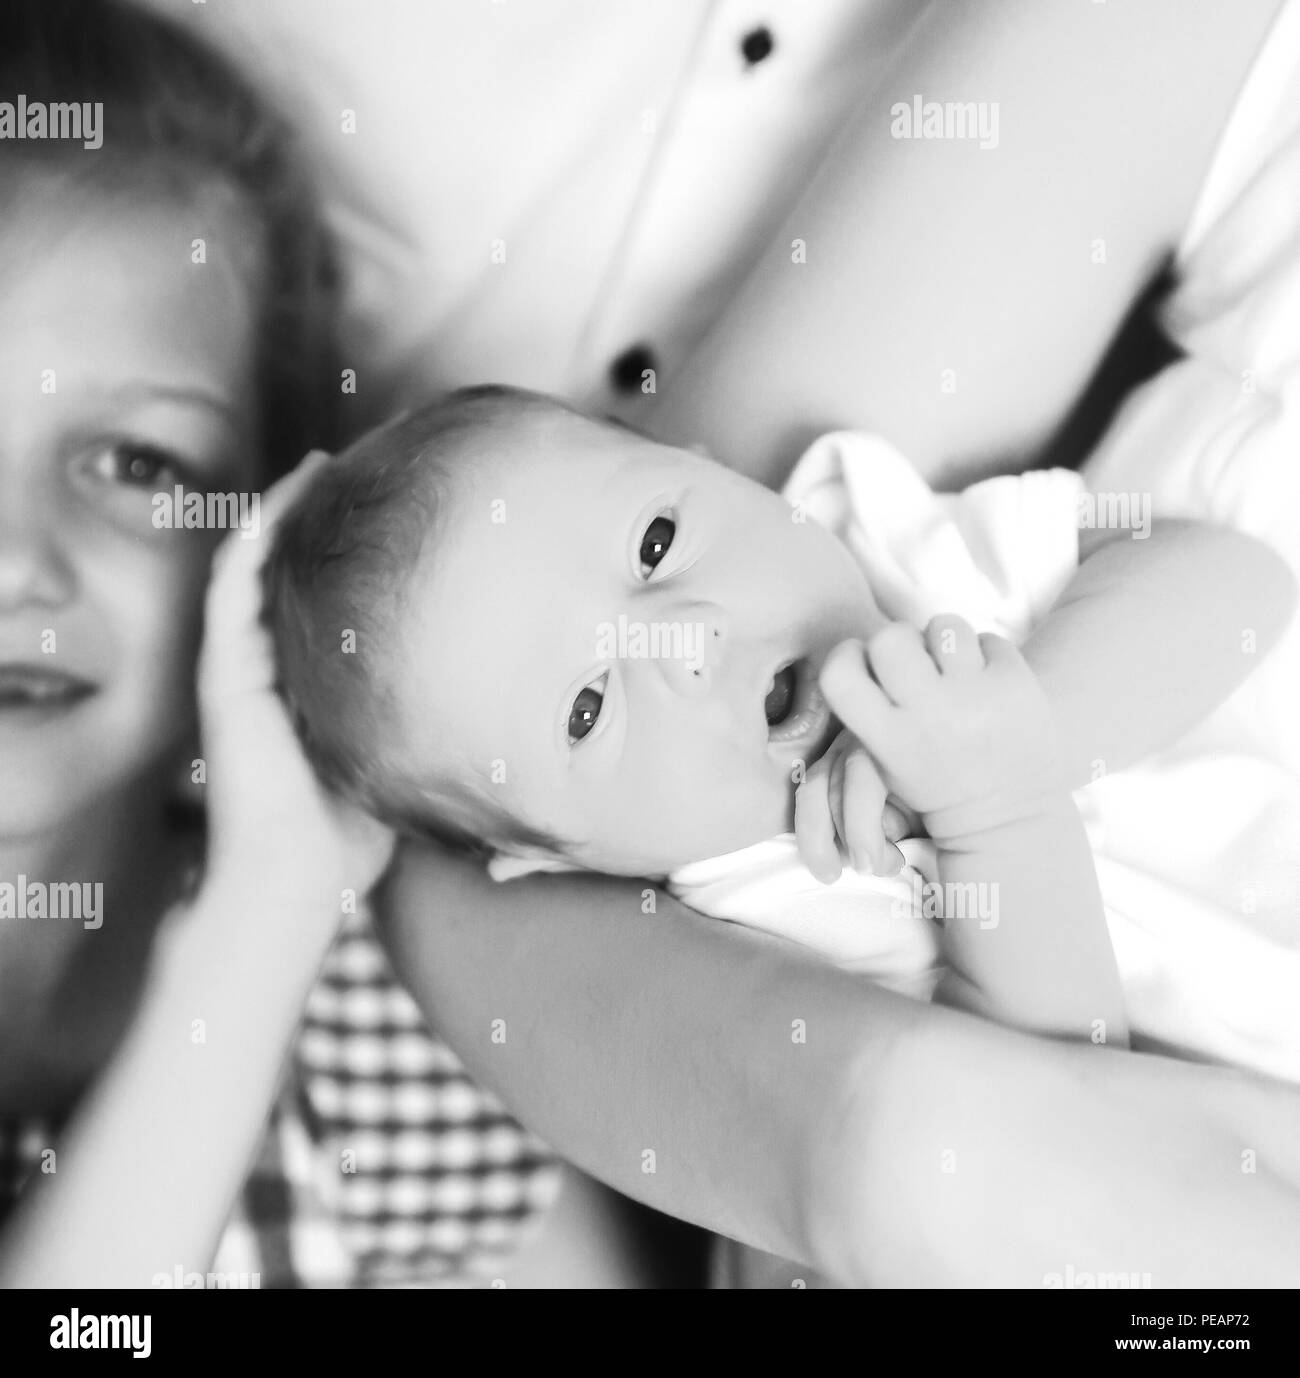 older sister next to a newborn baby Stock Photo